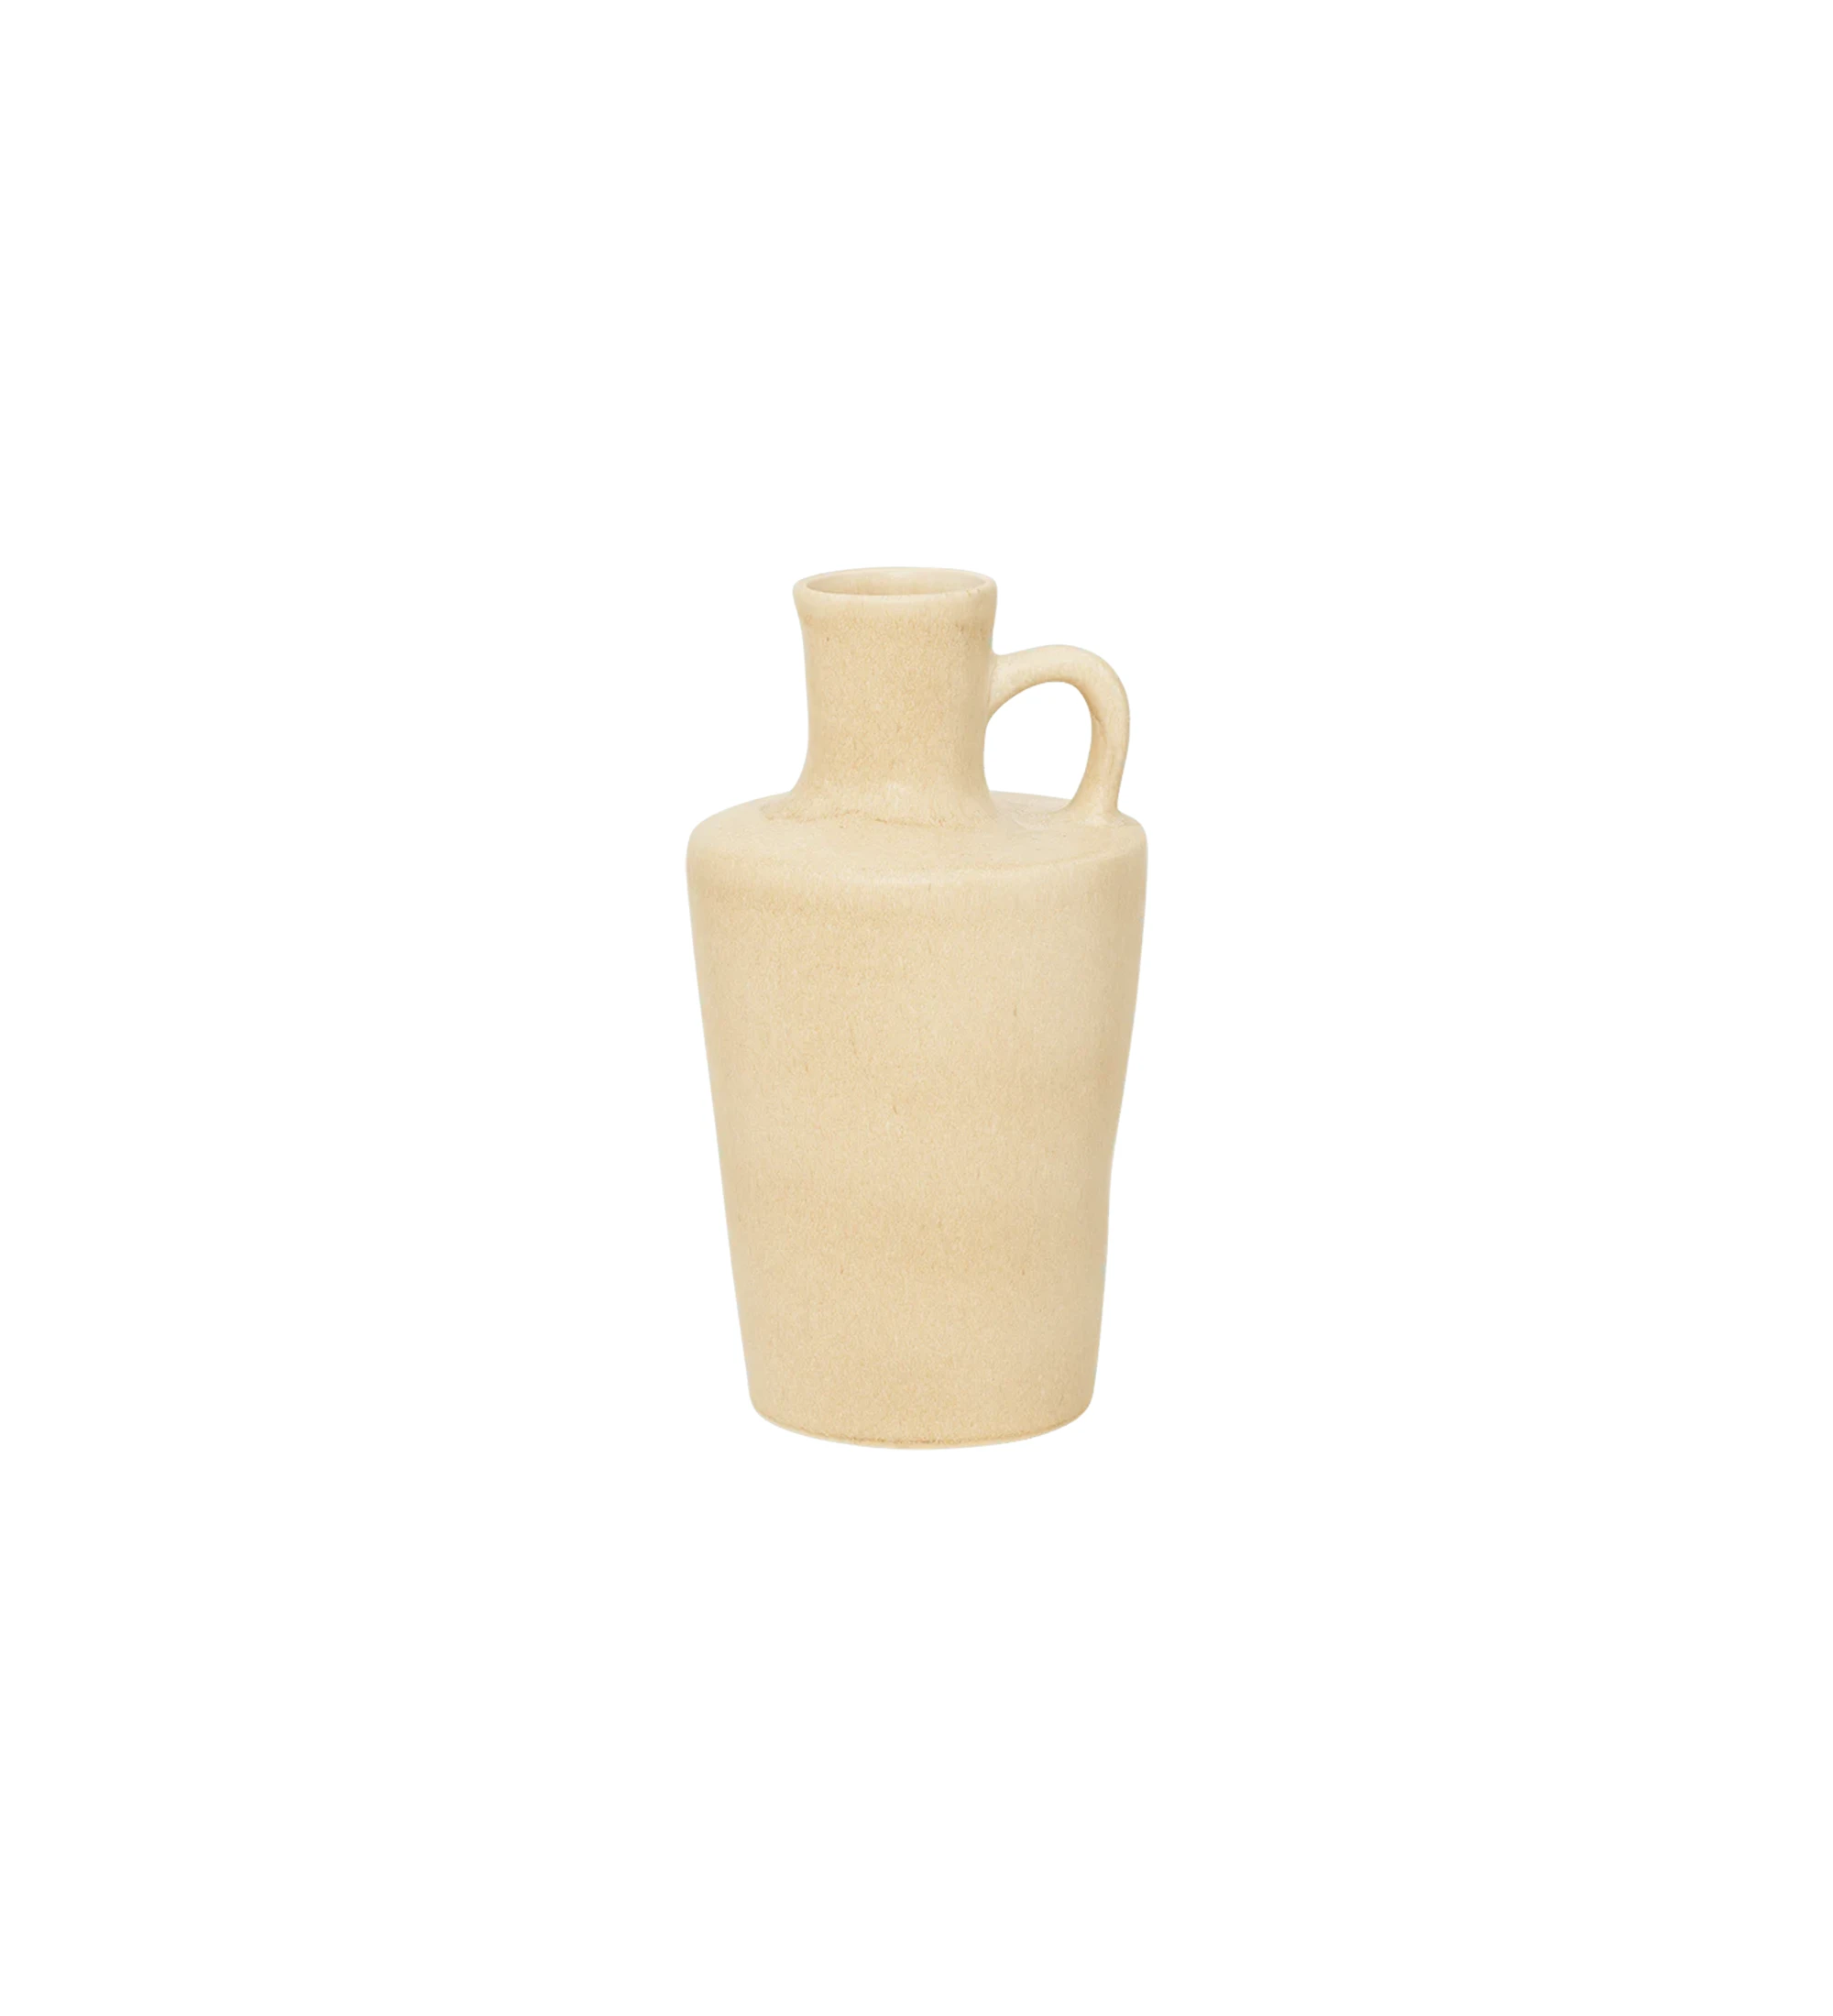 Handmade vase, with ceramic structure covered with slightly glossy enamel in light khaki, made in Portugal.